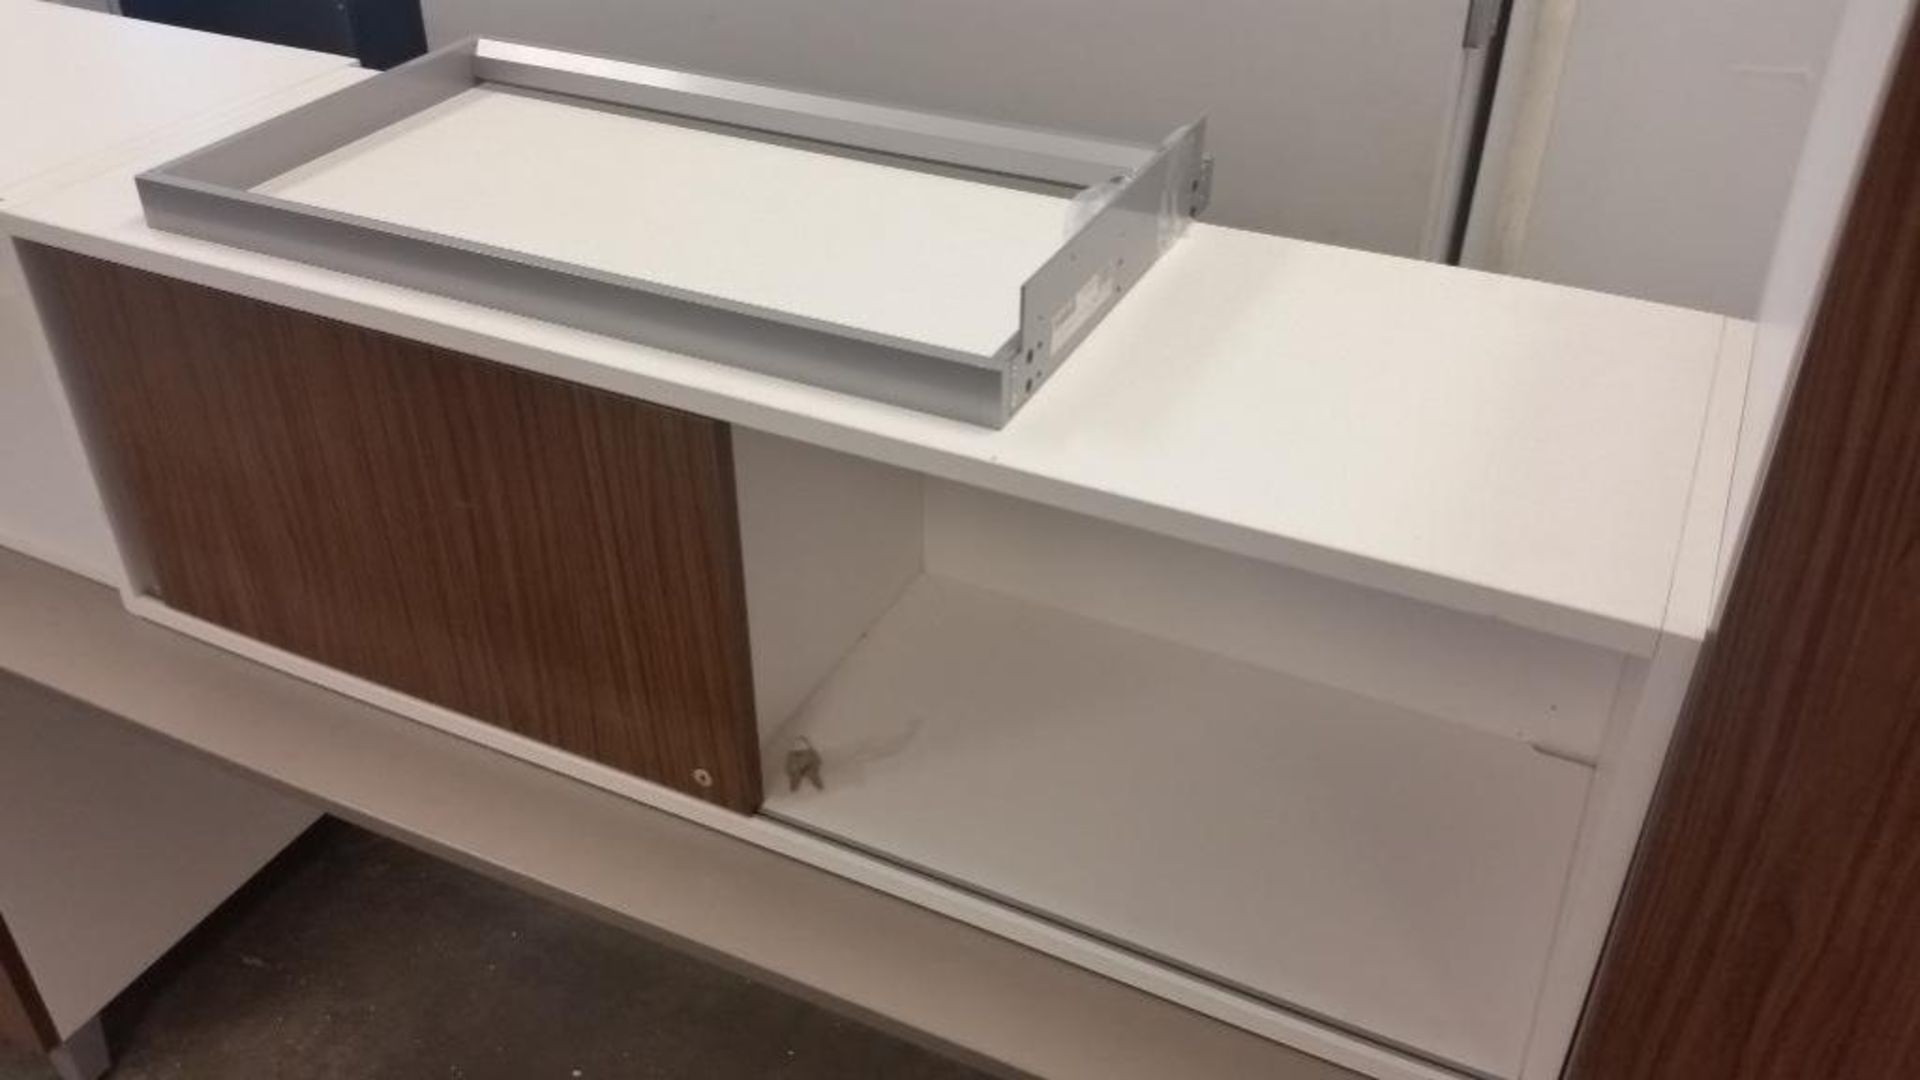 Allsteel office desk with (2) overhead cabinets, (5) drawers, (1) hanging cabinet - Image 3 of 5